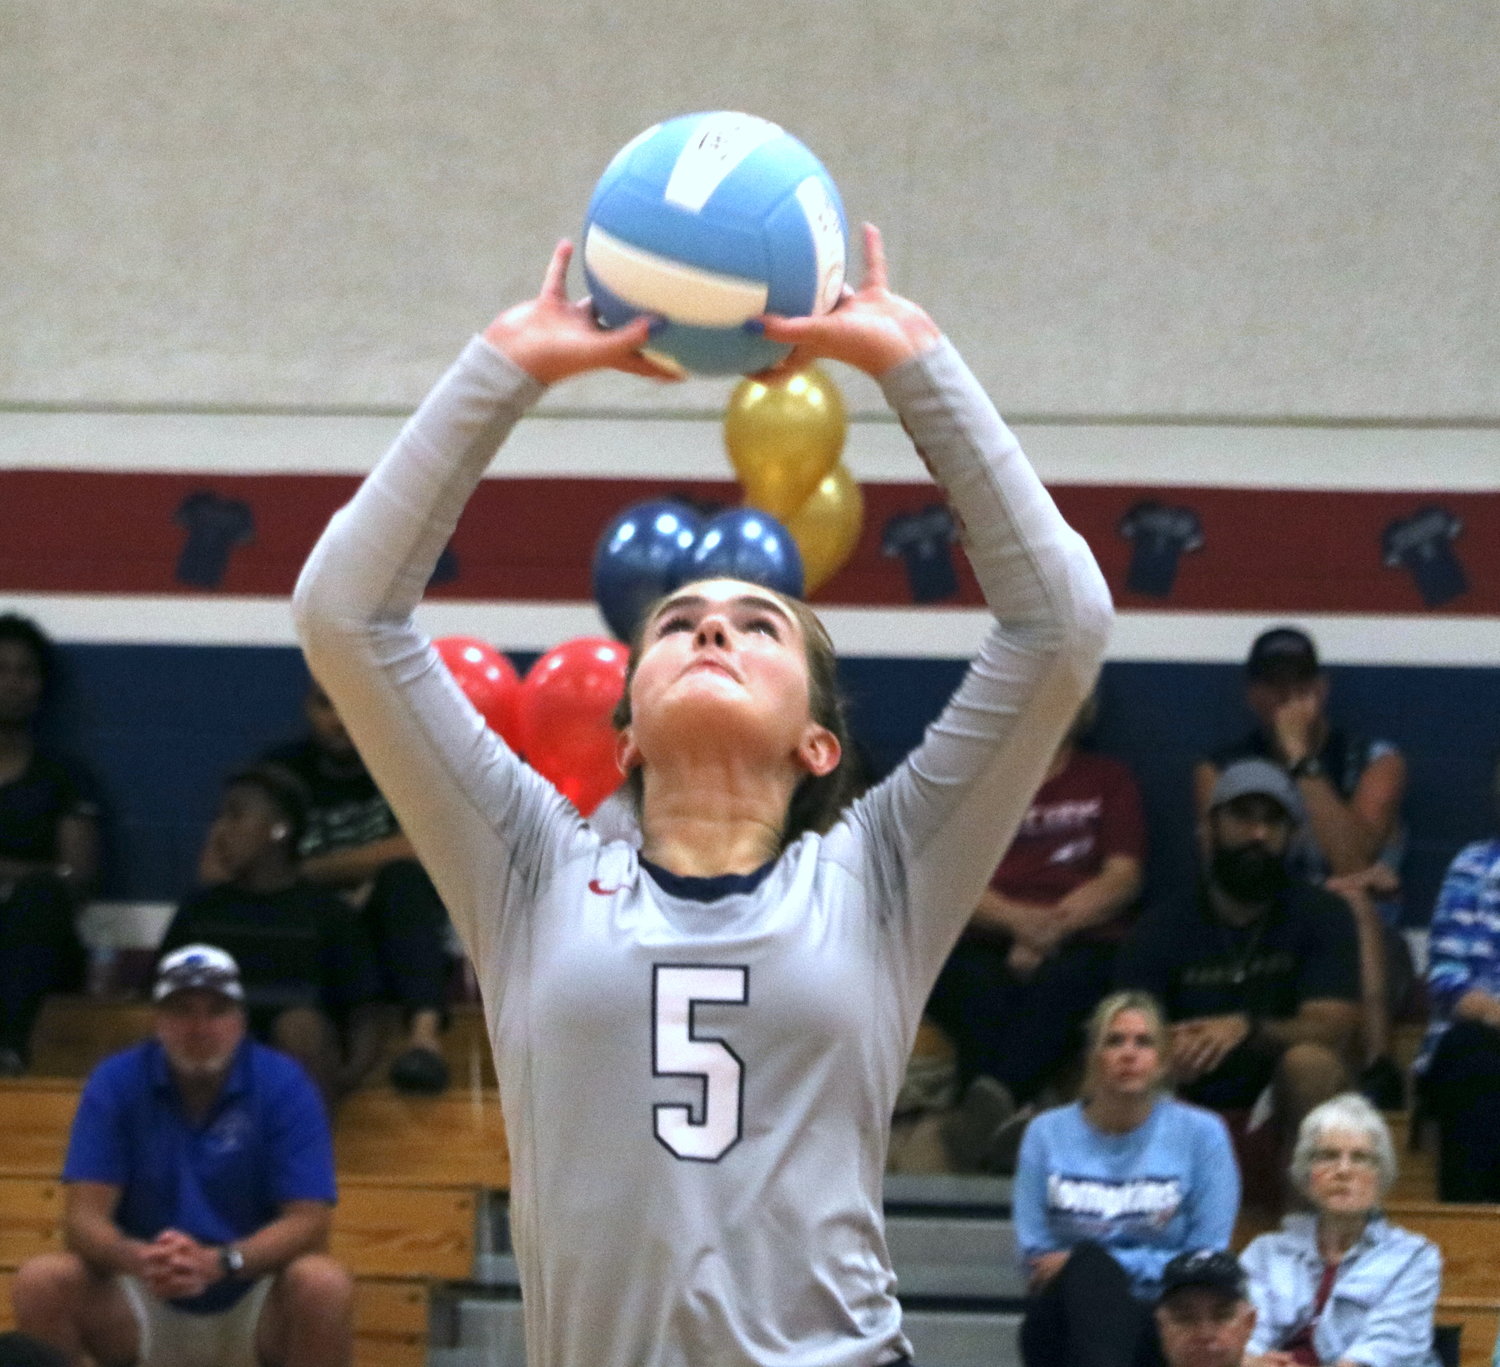 Tompkins’ Brooklyn Merrell sets a ball during Tuesday’s match between Tompkins and Katy at the Tompkins gym.